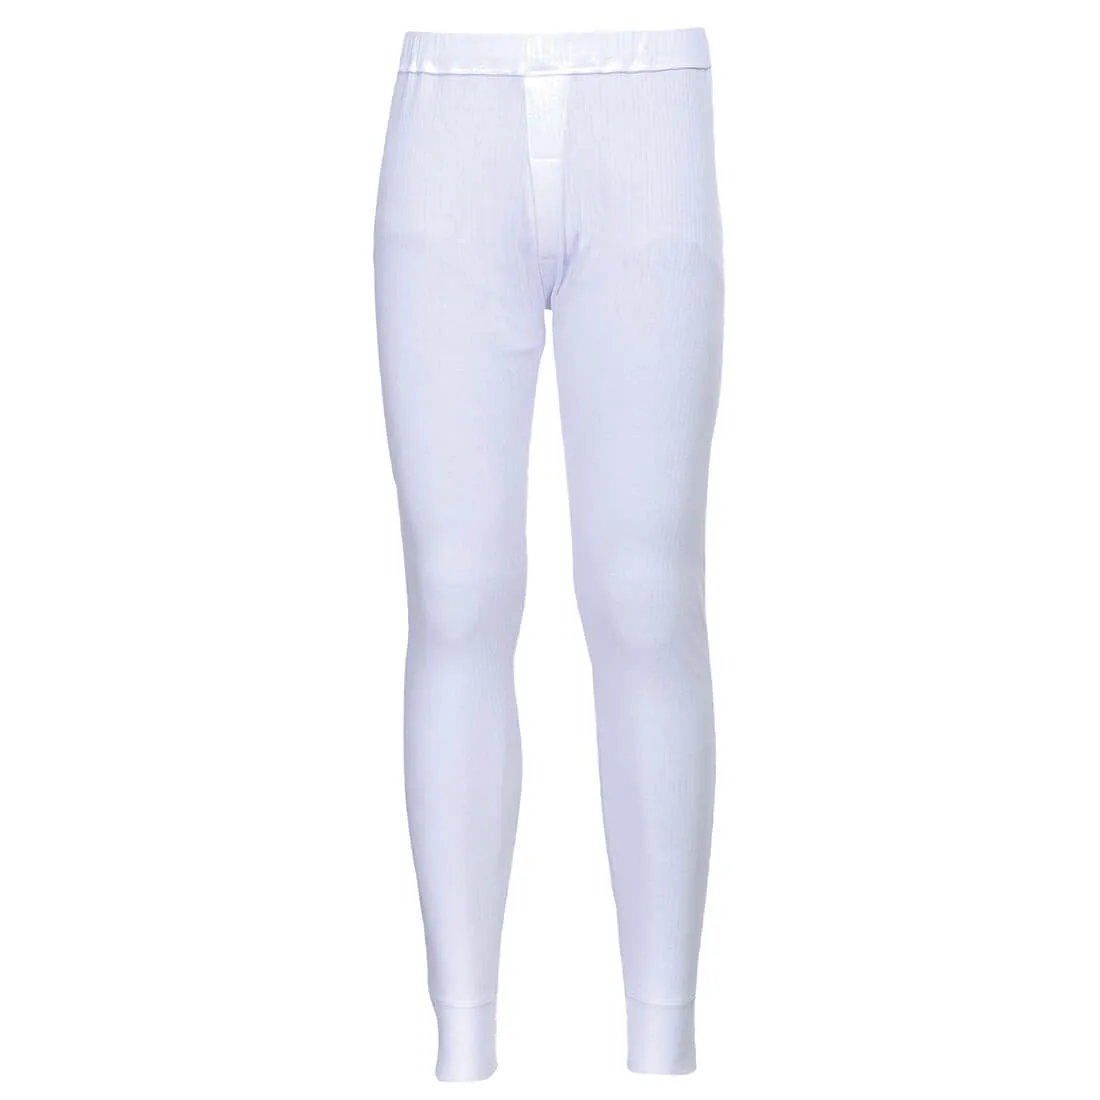 Portwest Thermal Trousers - White, 2XL